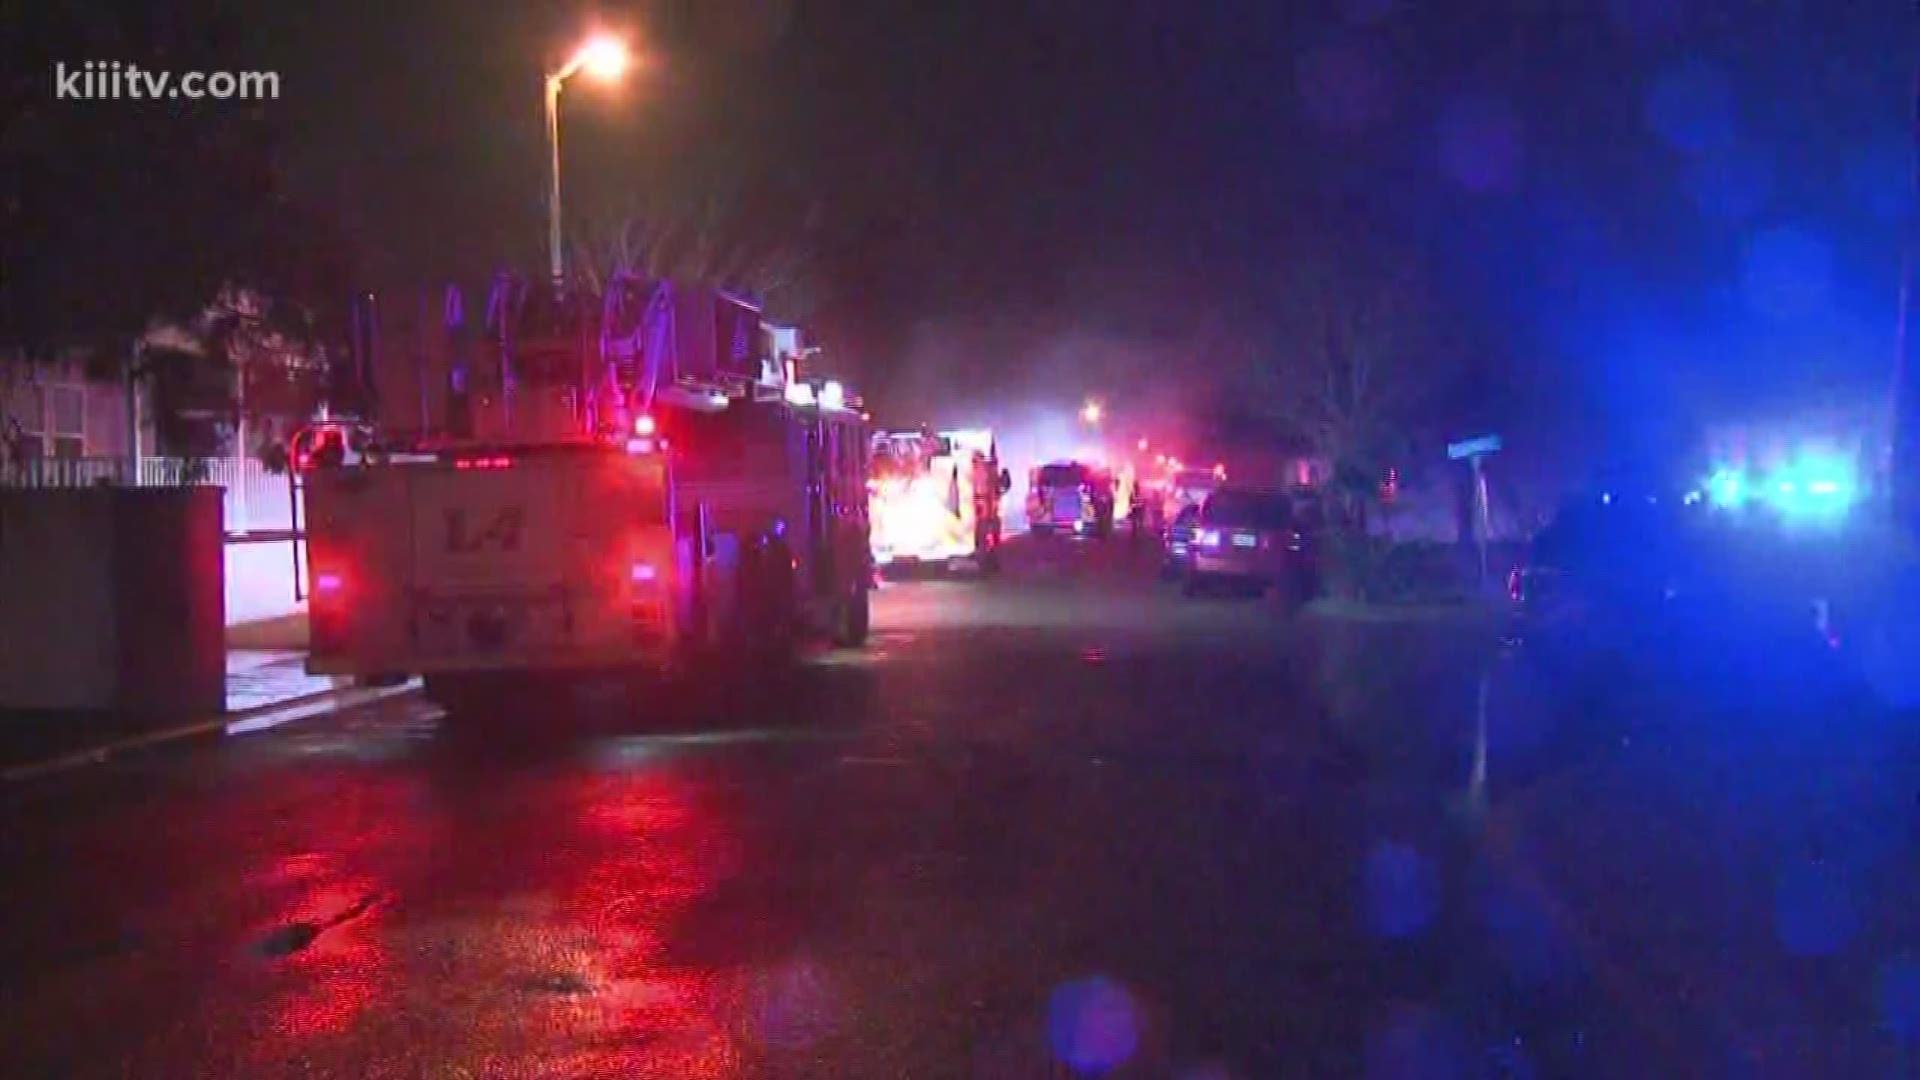 A Corpus Christi family of four is without a roof over their heads after a fire broke out Tuesday night at their mobile home in the 5900 block of Ayers at Misty Winds.